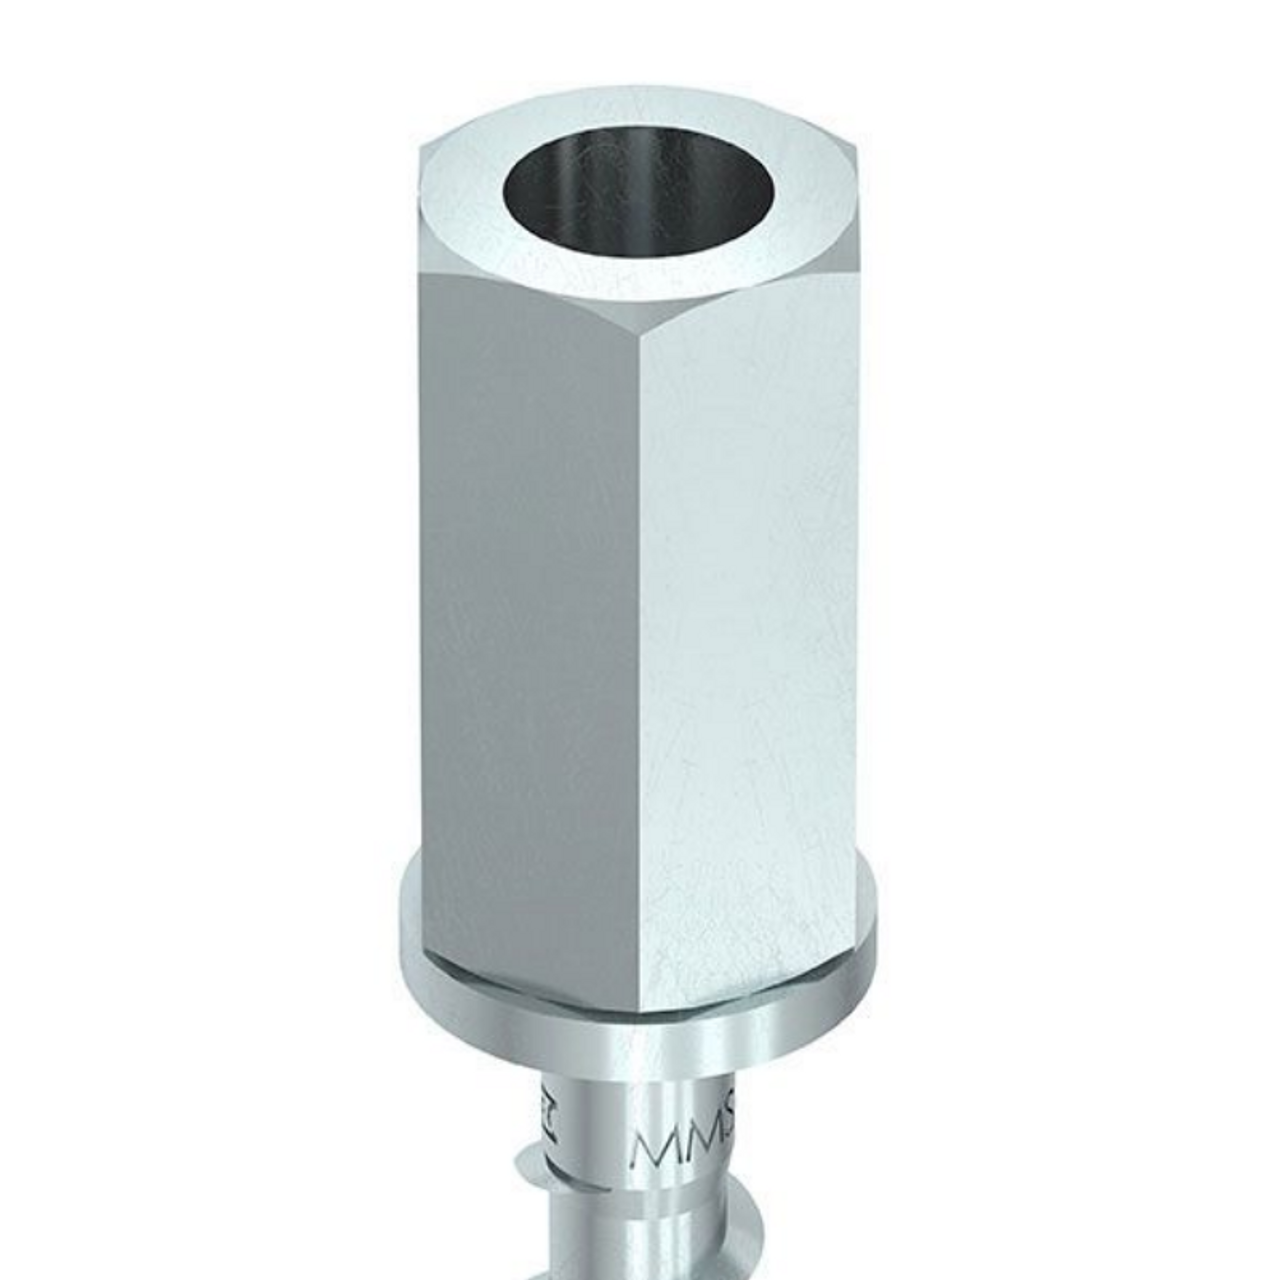 Buy Online HECO M8 Internal Thread Screw Anchor Silver Zinc with Silver Zinc for the Carpentry Industry and Installers in Perth, Sydney and Brisbane